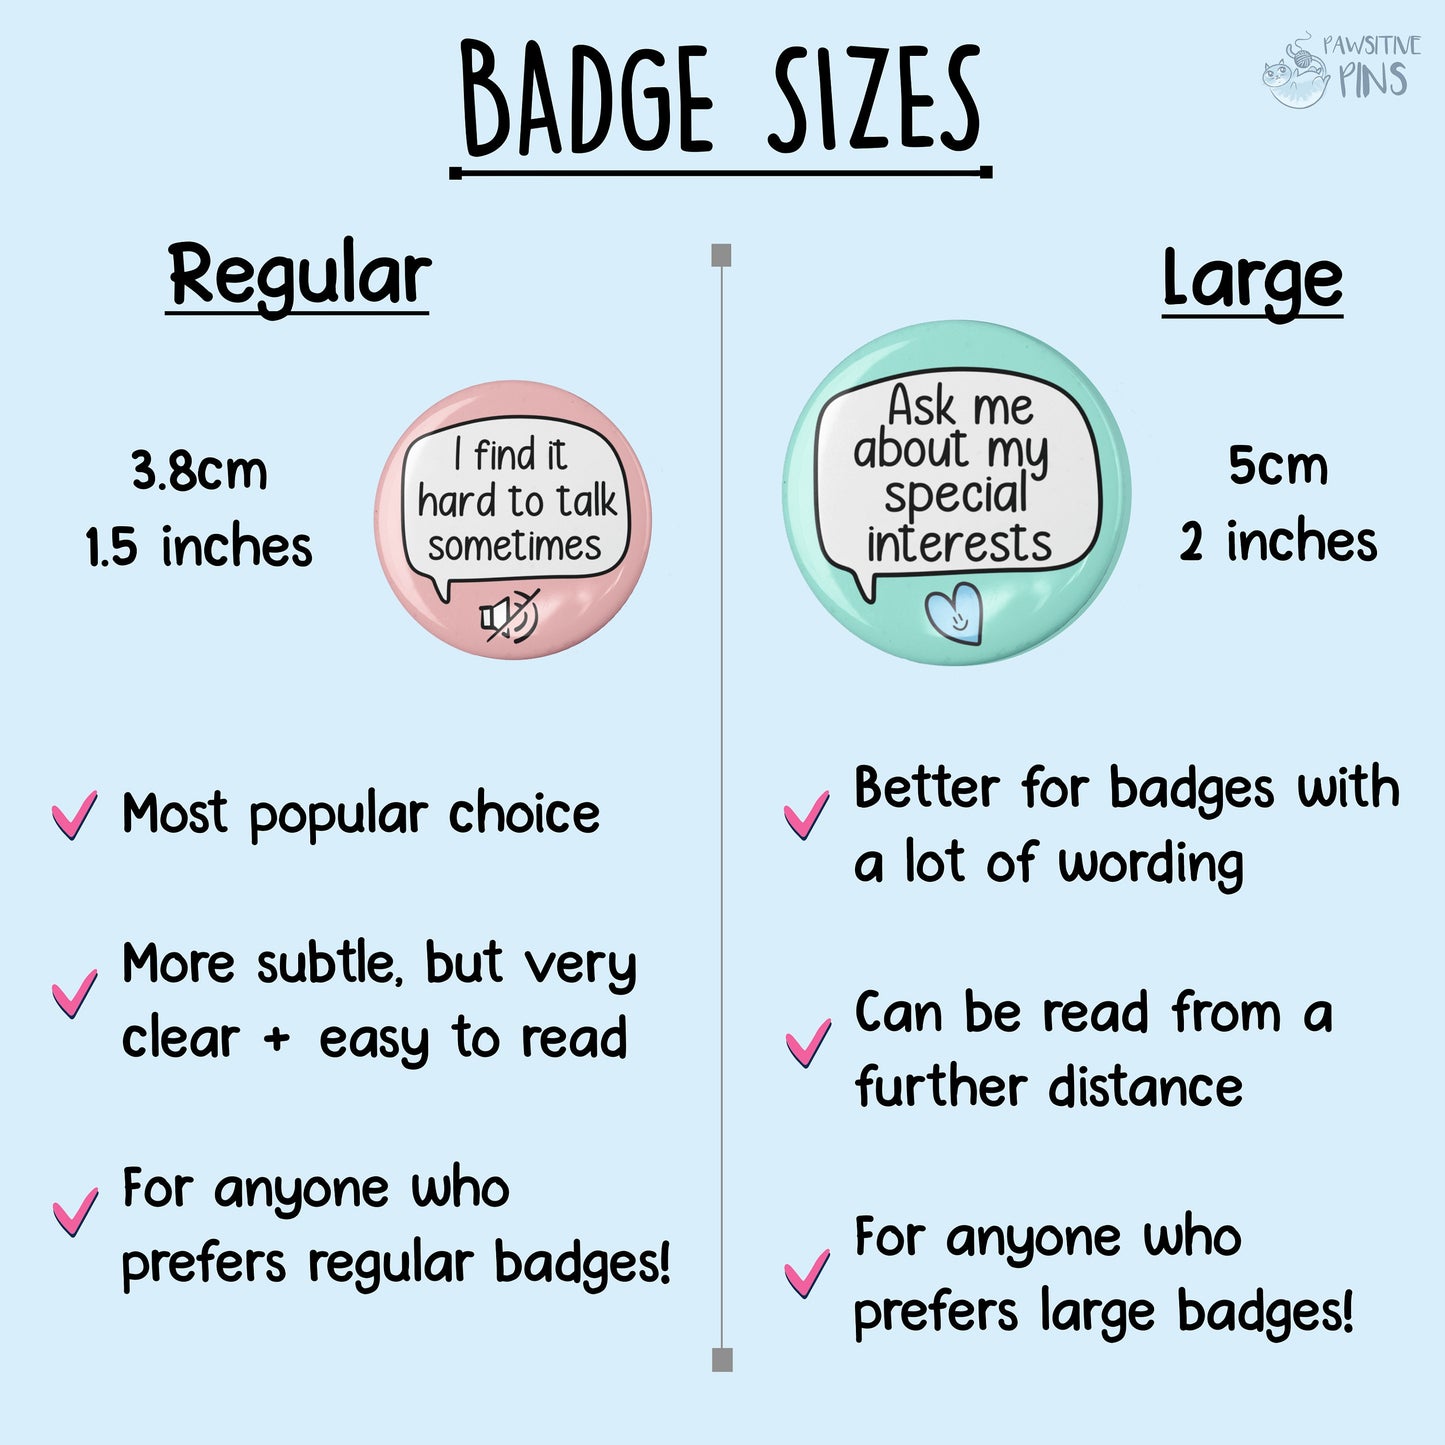 I Struggle With My Spelling Badge Pin | Dyslexia, Dysgraphia